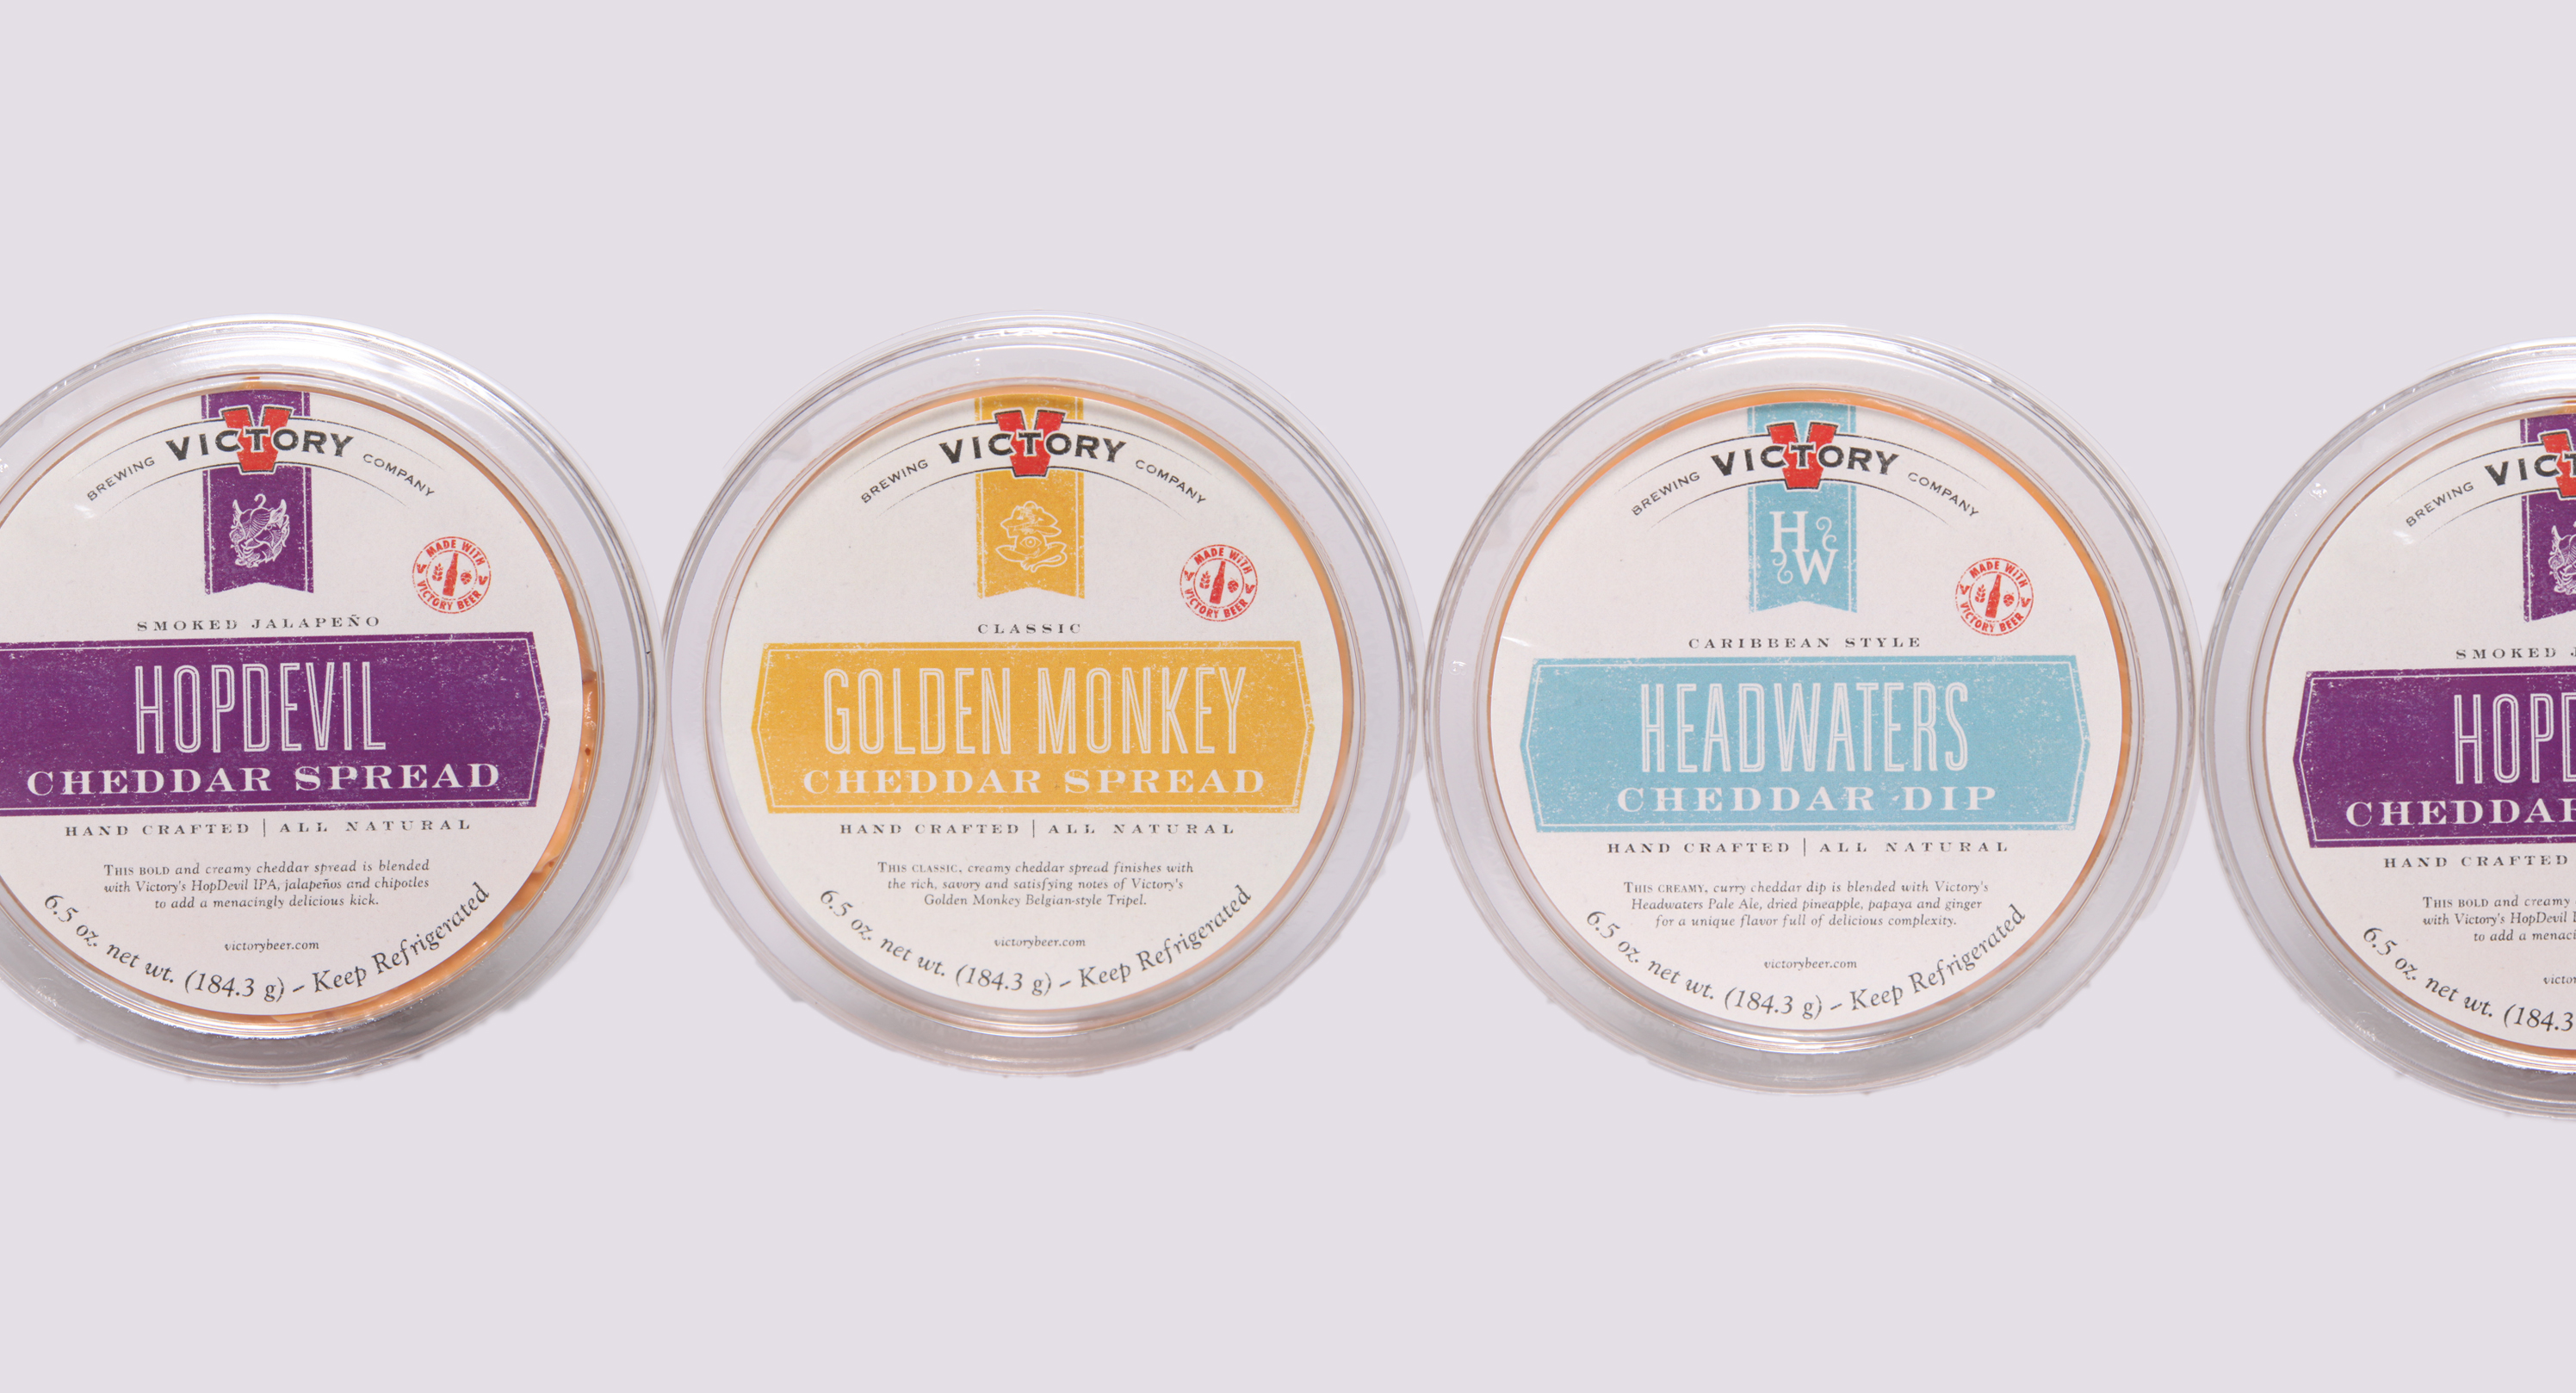 Victory Brewing Company introduces line of craft beer-inspired gourmet cheddar cheese spreads at Whole Foods Markets.